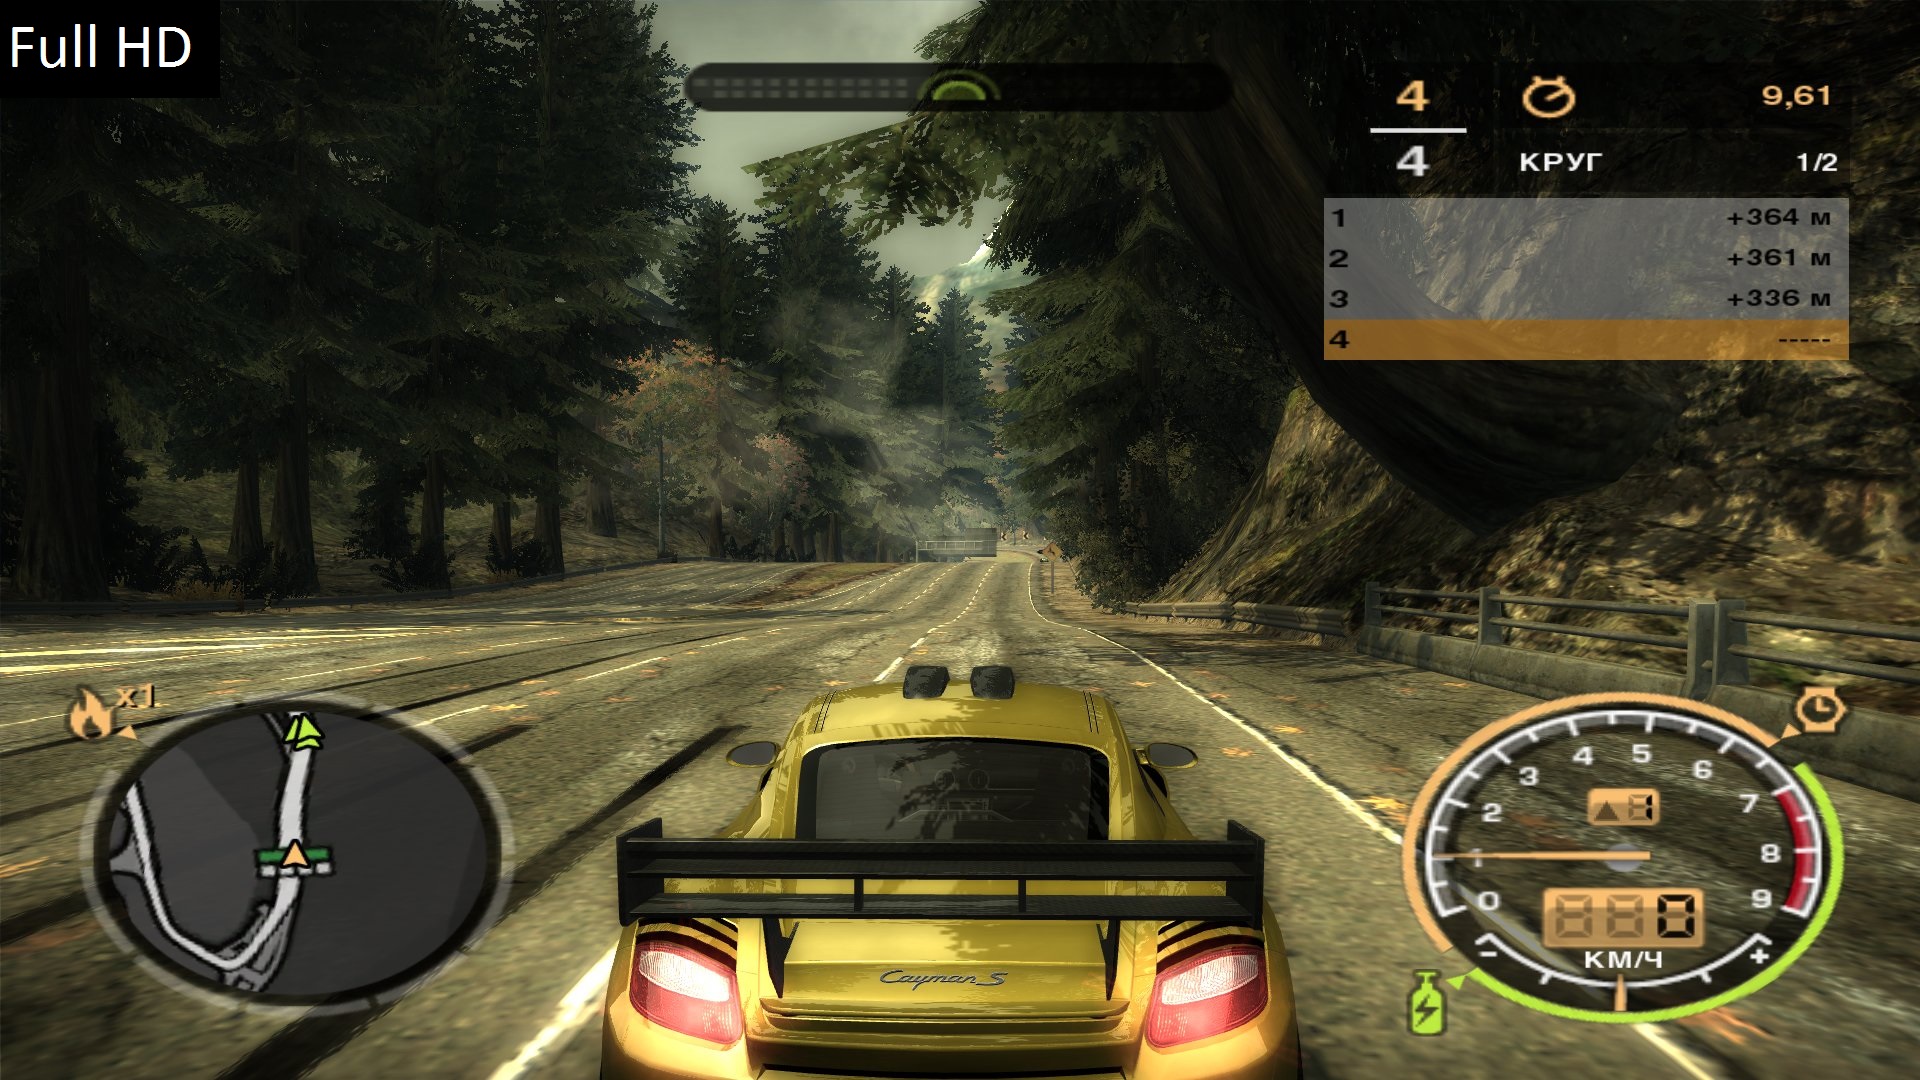 Игры 2005 от механики. NFS most wanted 2005. Need for Speed: most wanted 5-1-0. Управления в NFS most wanted 2005. NFS most wanted Control Panel.